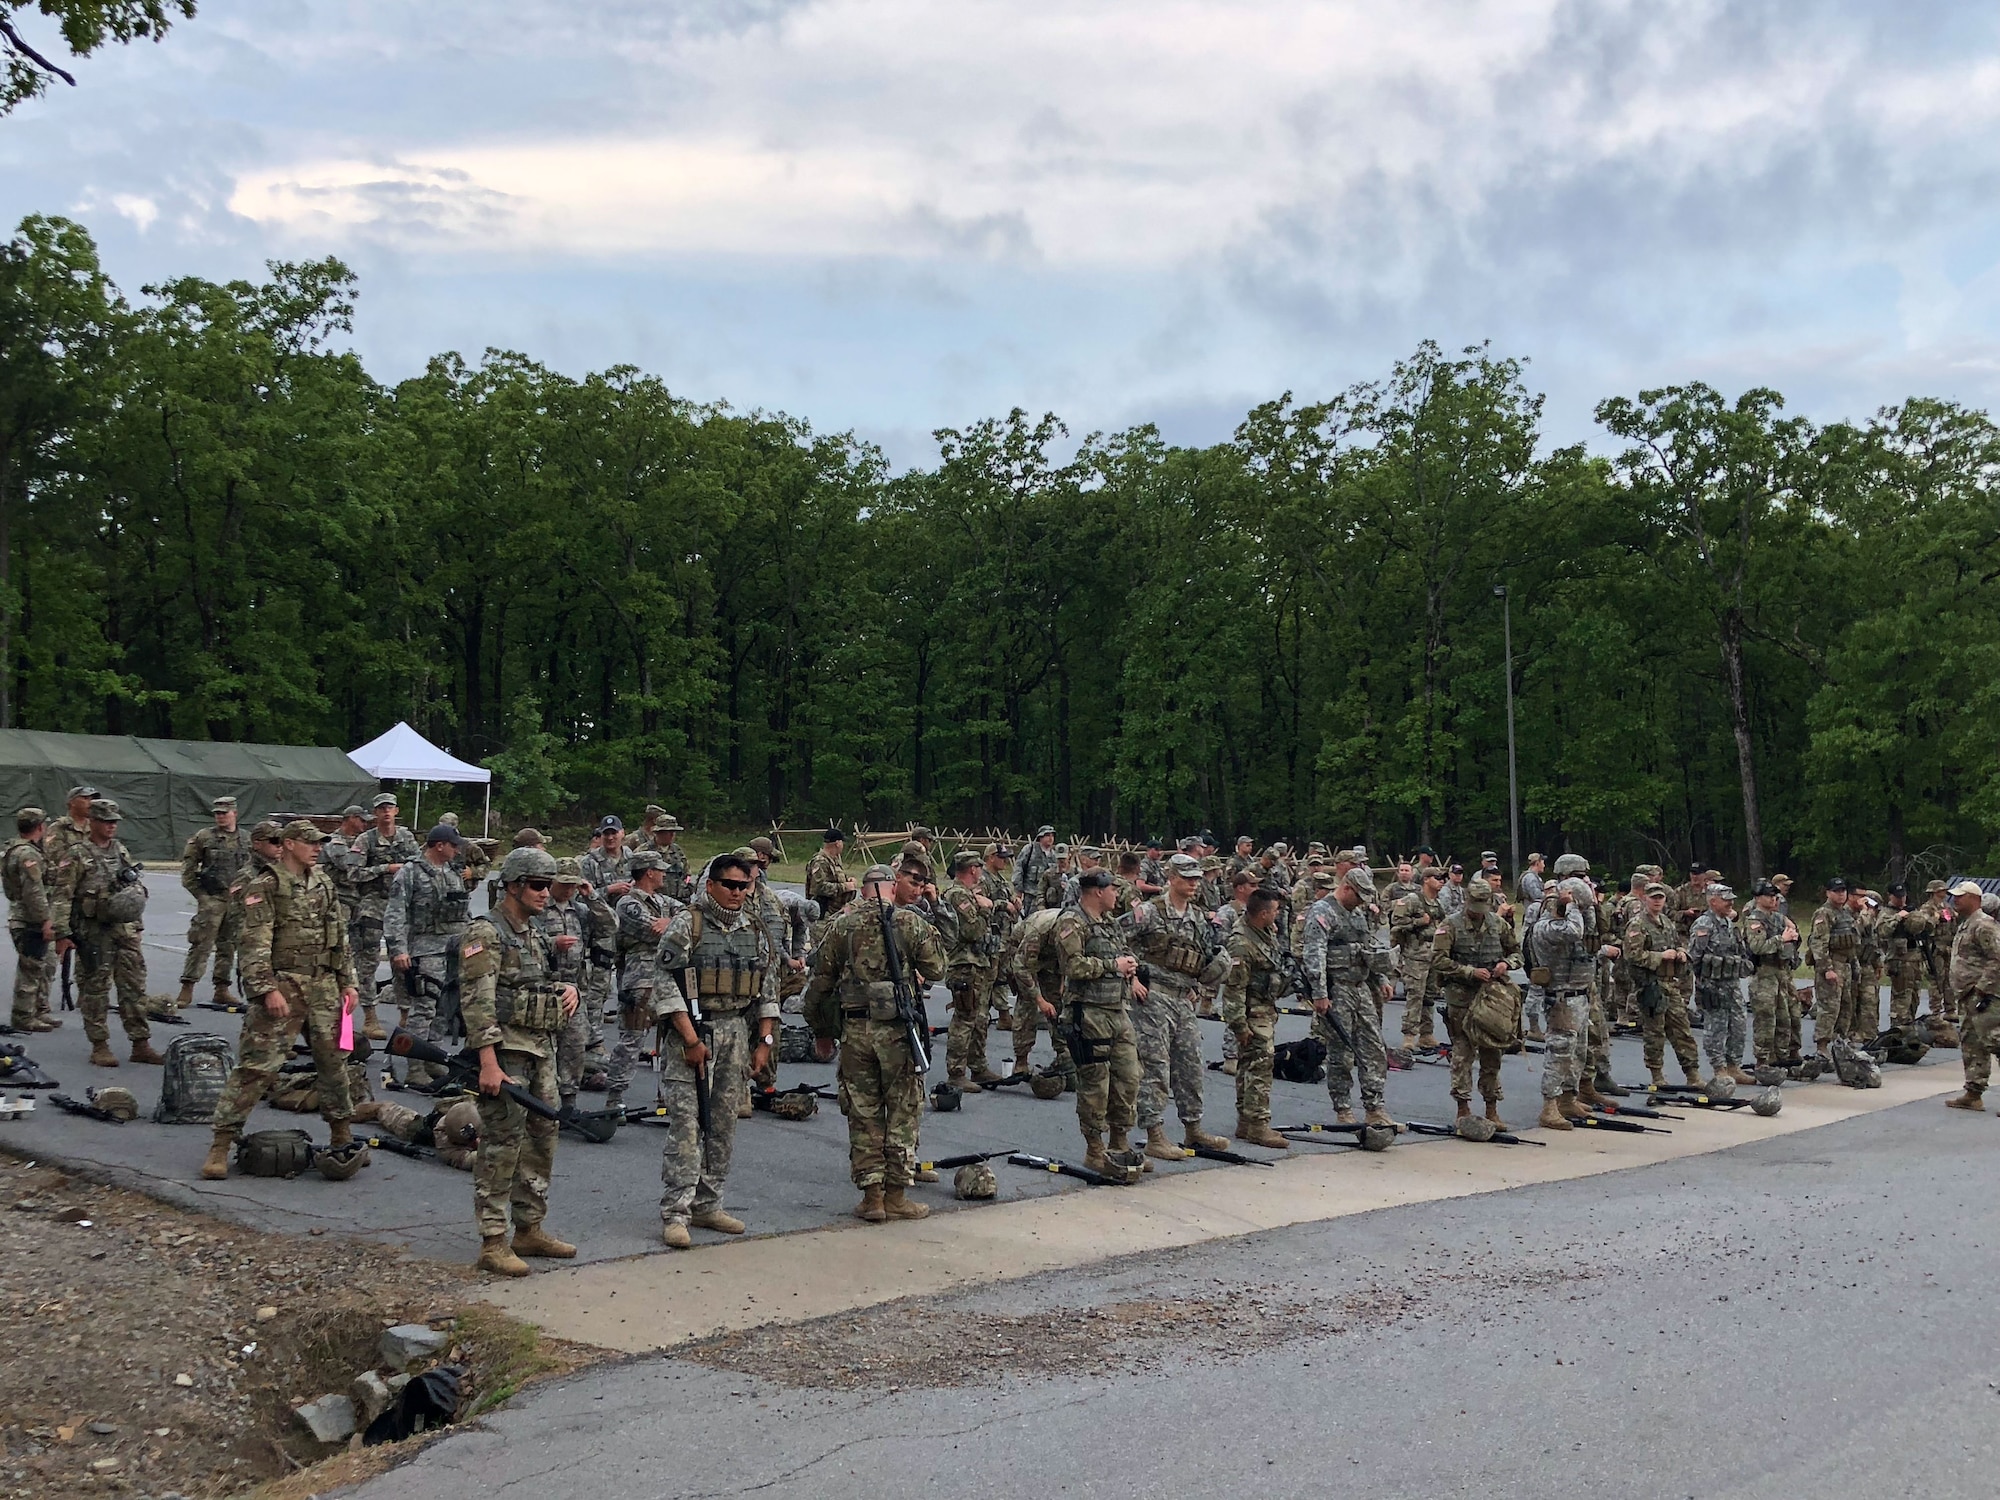 Marksmen teams wait to enter range during the  47th Annual Winston P. Wilson Championship, Robinson Maneuver Training Center, Arkansas, May 2, 2018.  The annual events, hosted by the National Guard Marksmanship Training Center April 29-May 4, 2018, offer Servicemembers from the National Guard and international community an opportunity to test marksmanship skills in a battle-focused environment. (U.S. Air National Guard photo by Staff Sgt. Hope Funderburk)